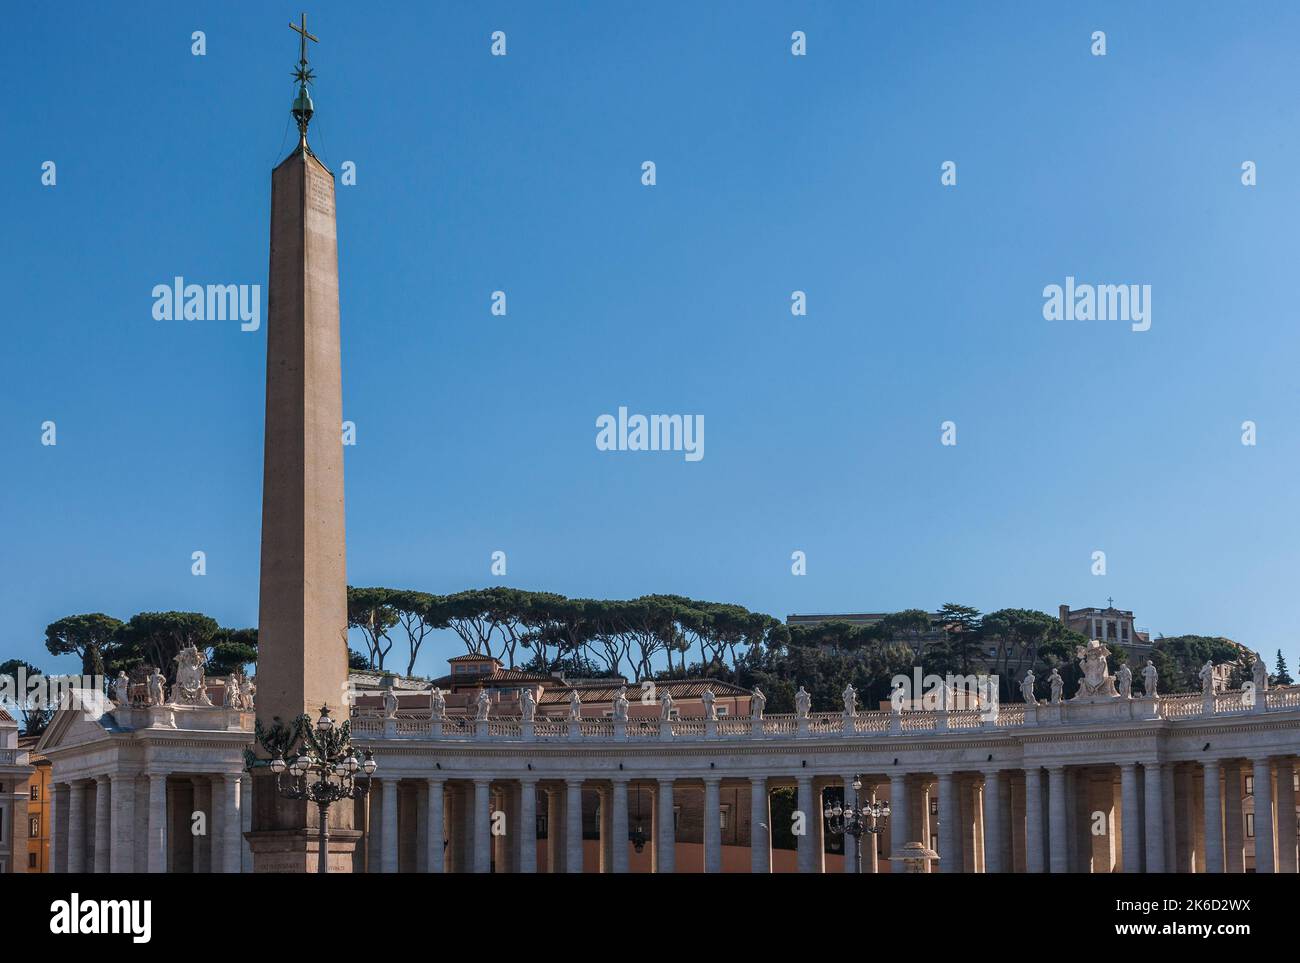 Vatican City, Vatican - February 10, 2013: The obelisk in St Peter's Square and the Bernini's Colonnade. Stock Photo